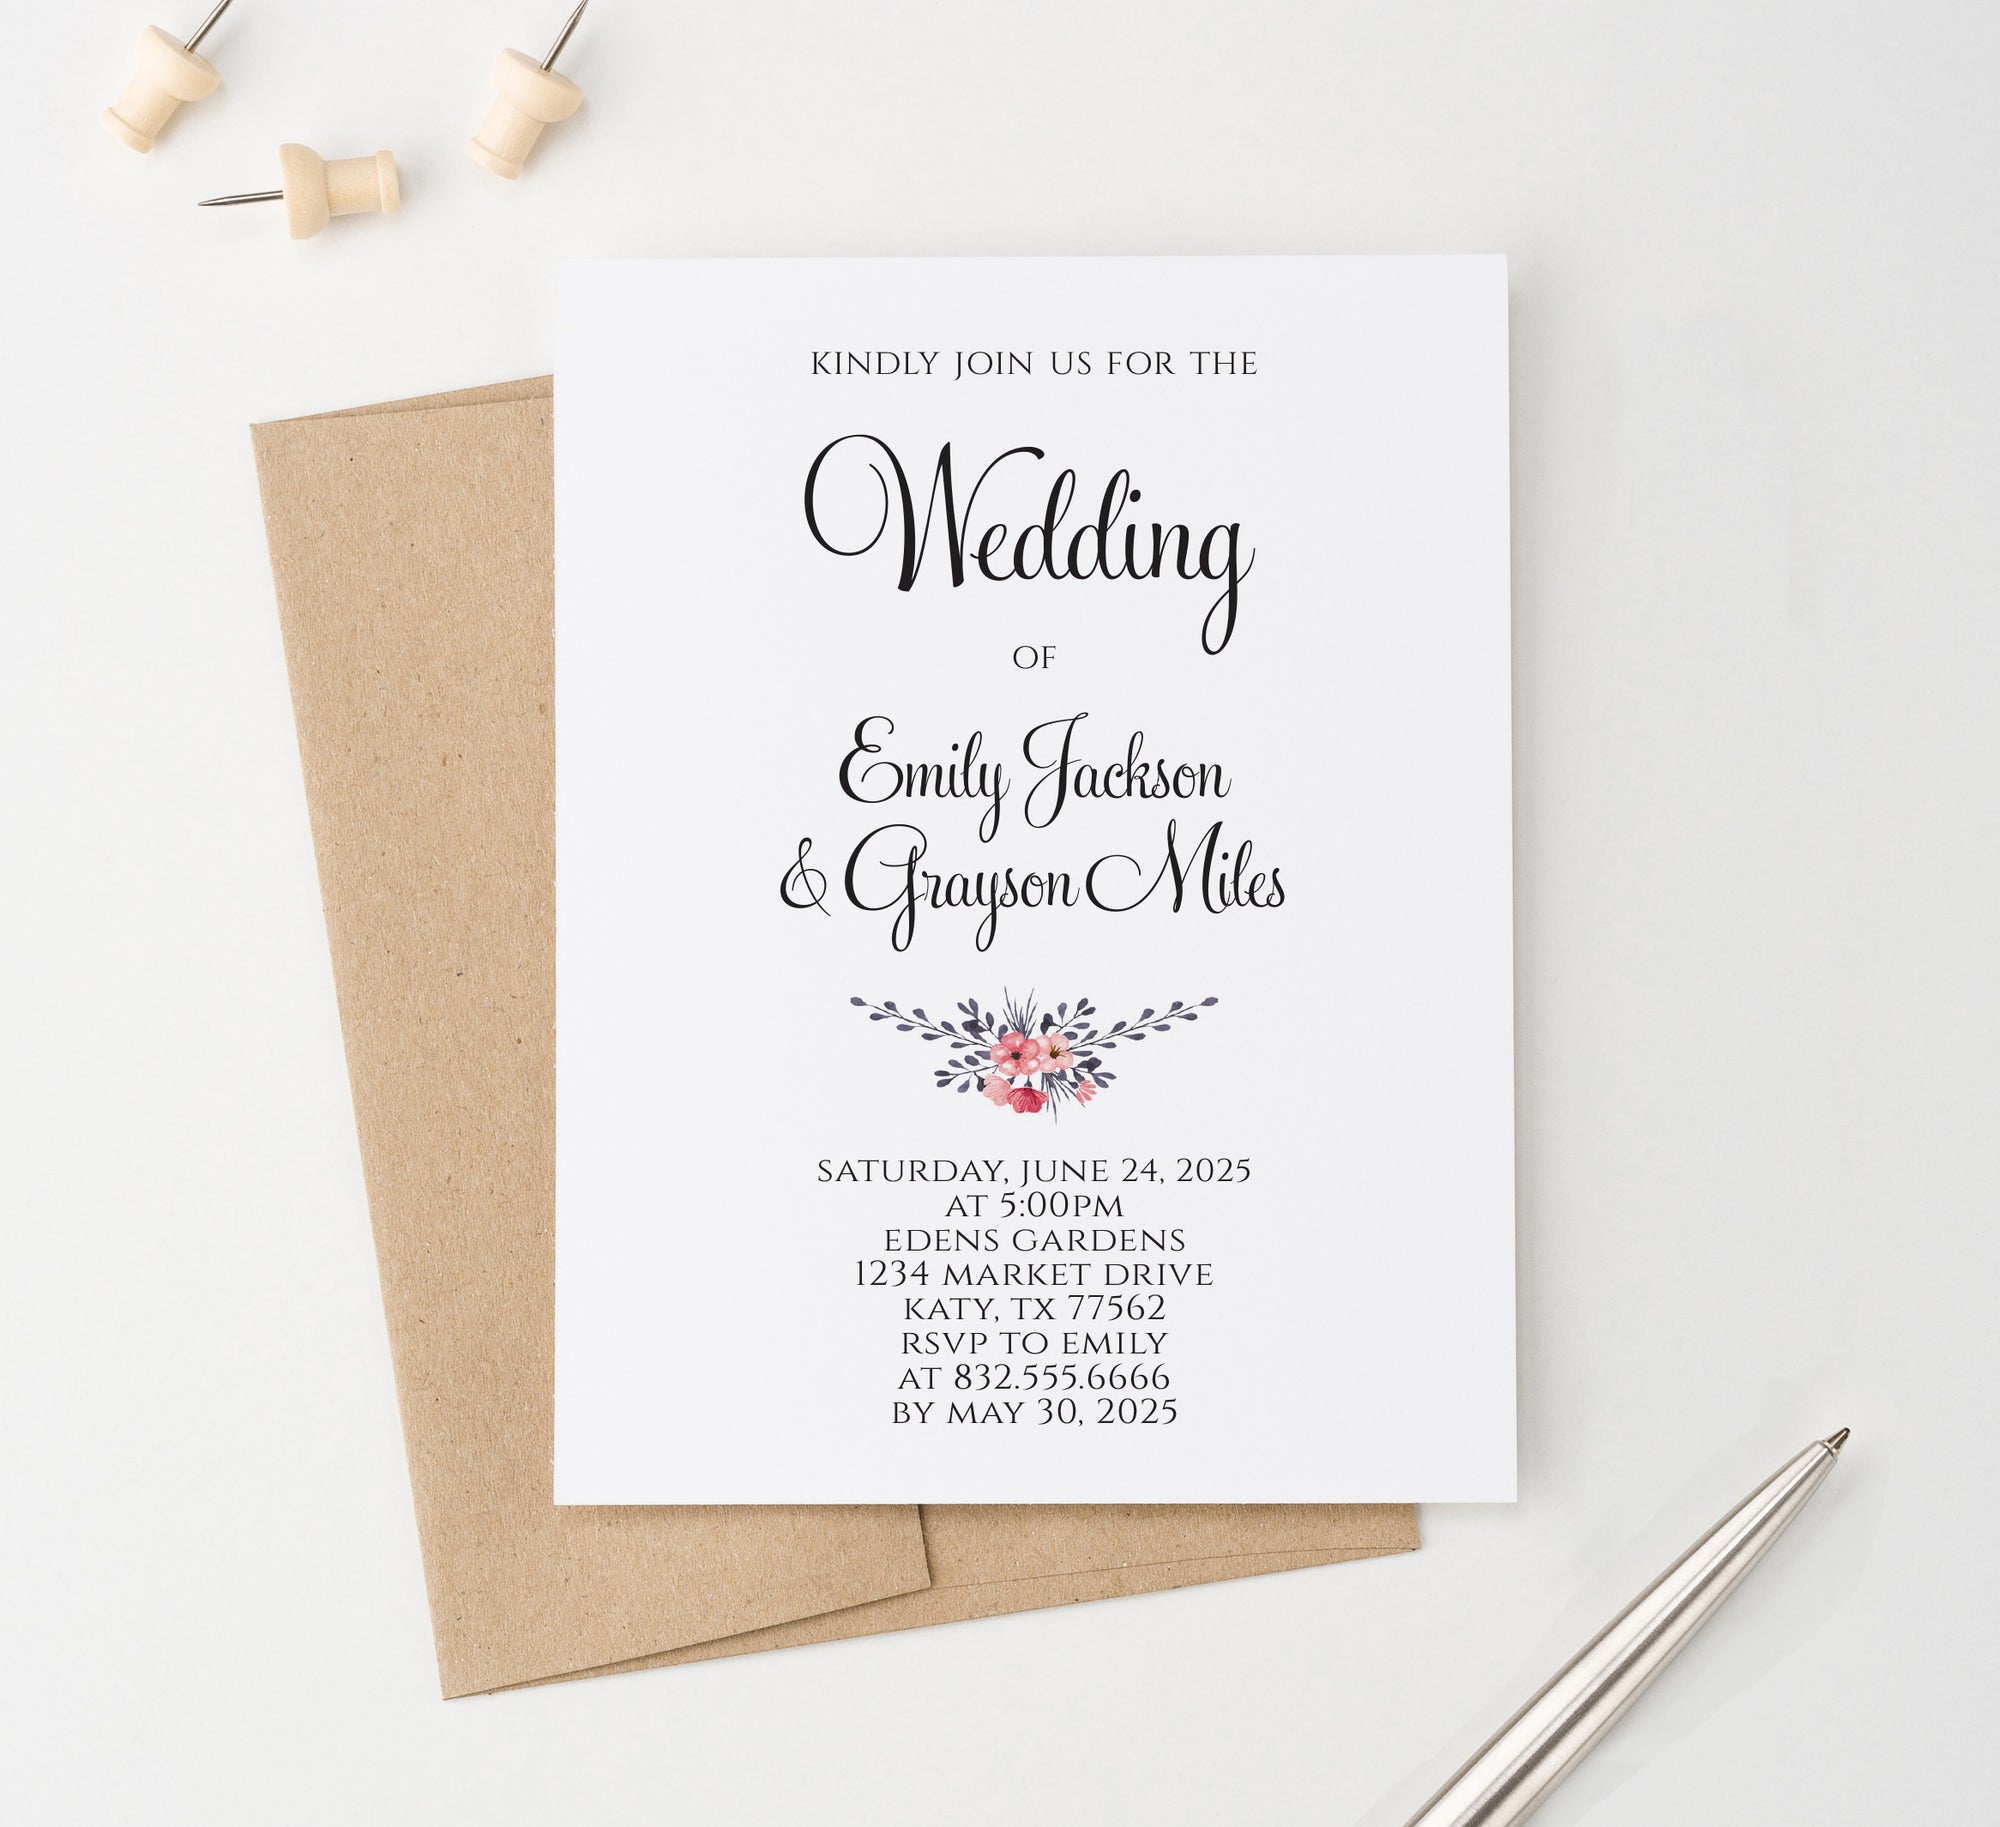 WI035 Personalized Simple Wedding Invitations with Flowers elegant classy classic invites marriage